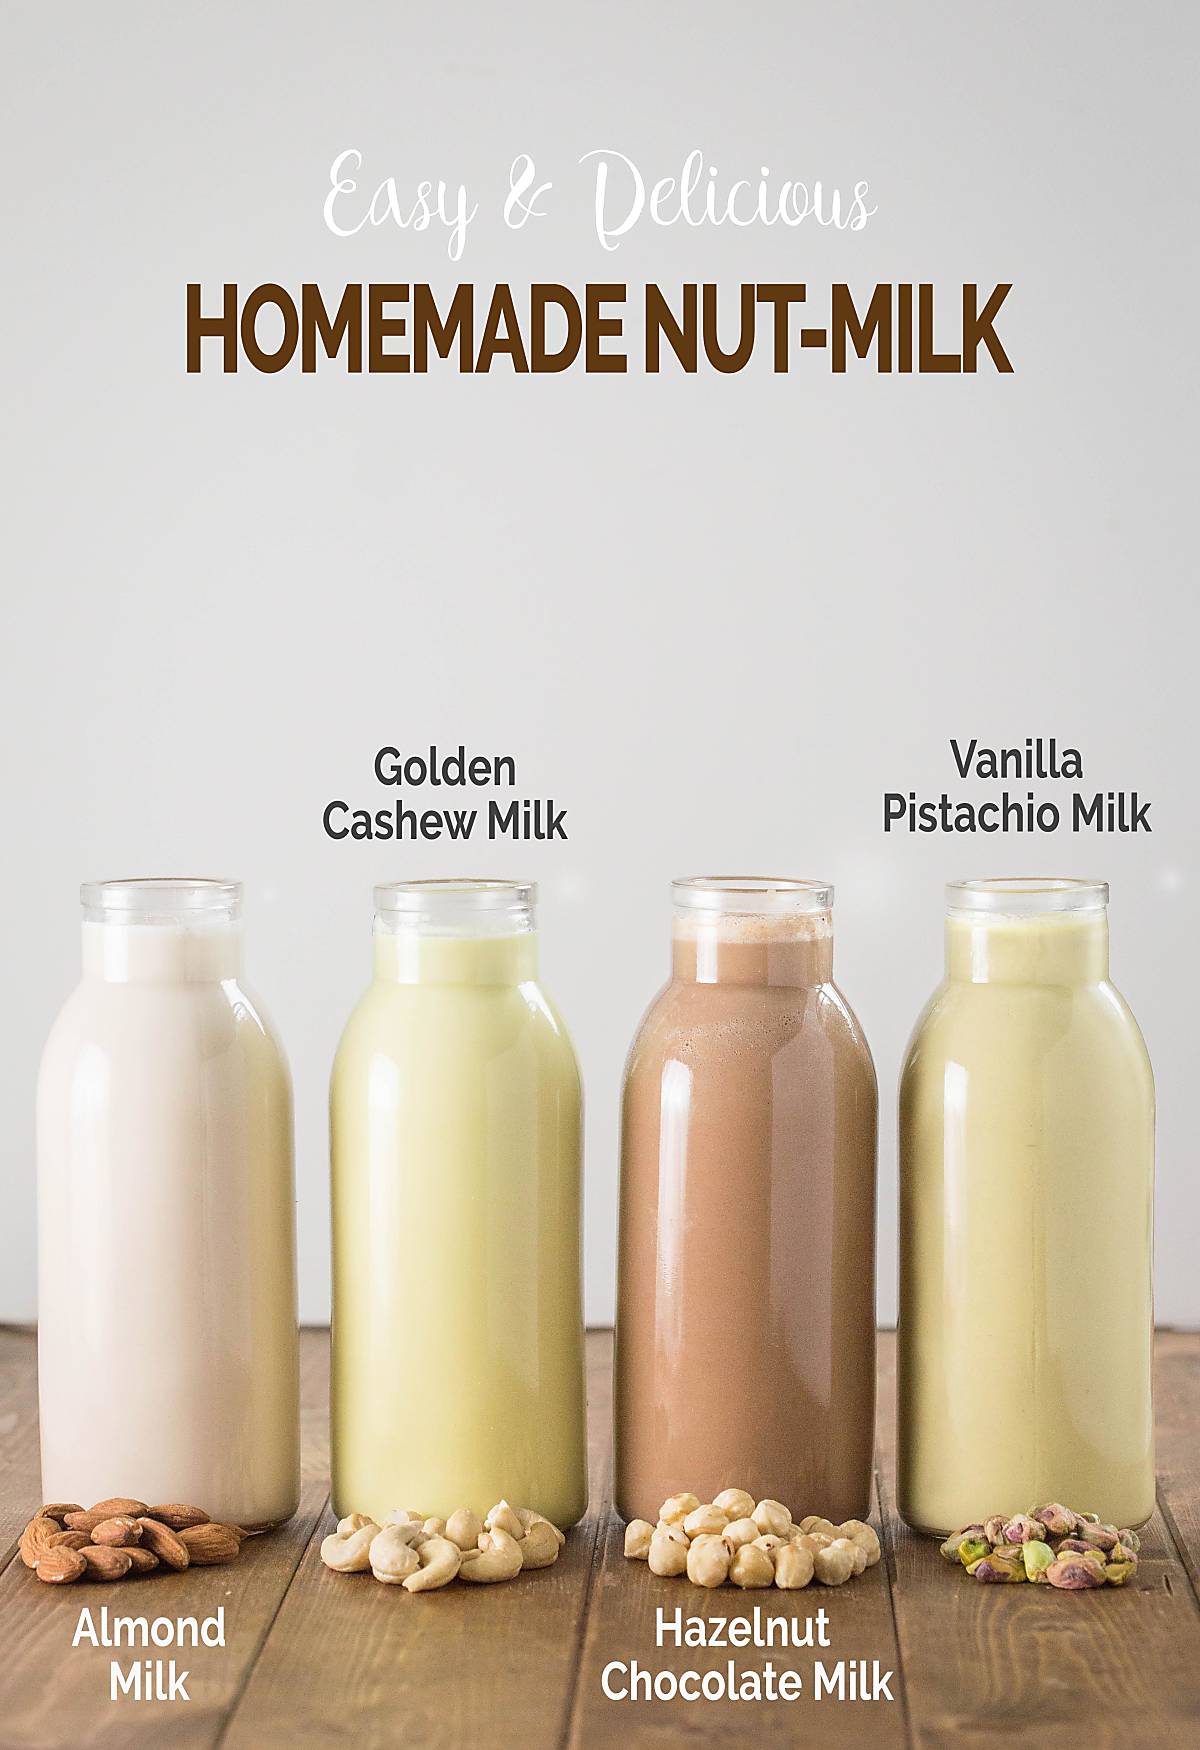 Different kinds of nut milk in glass bottles.